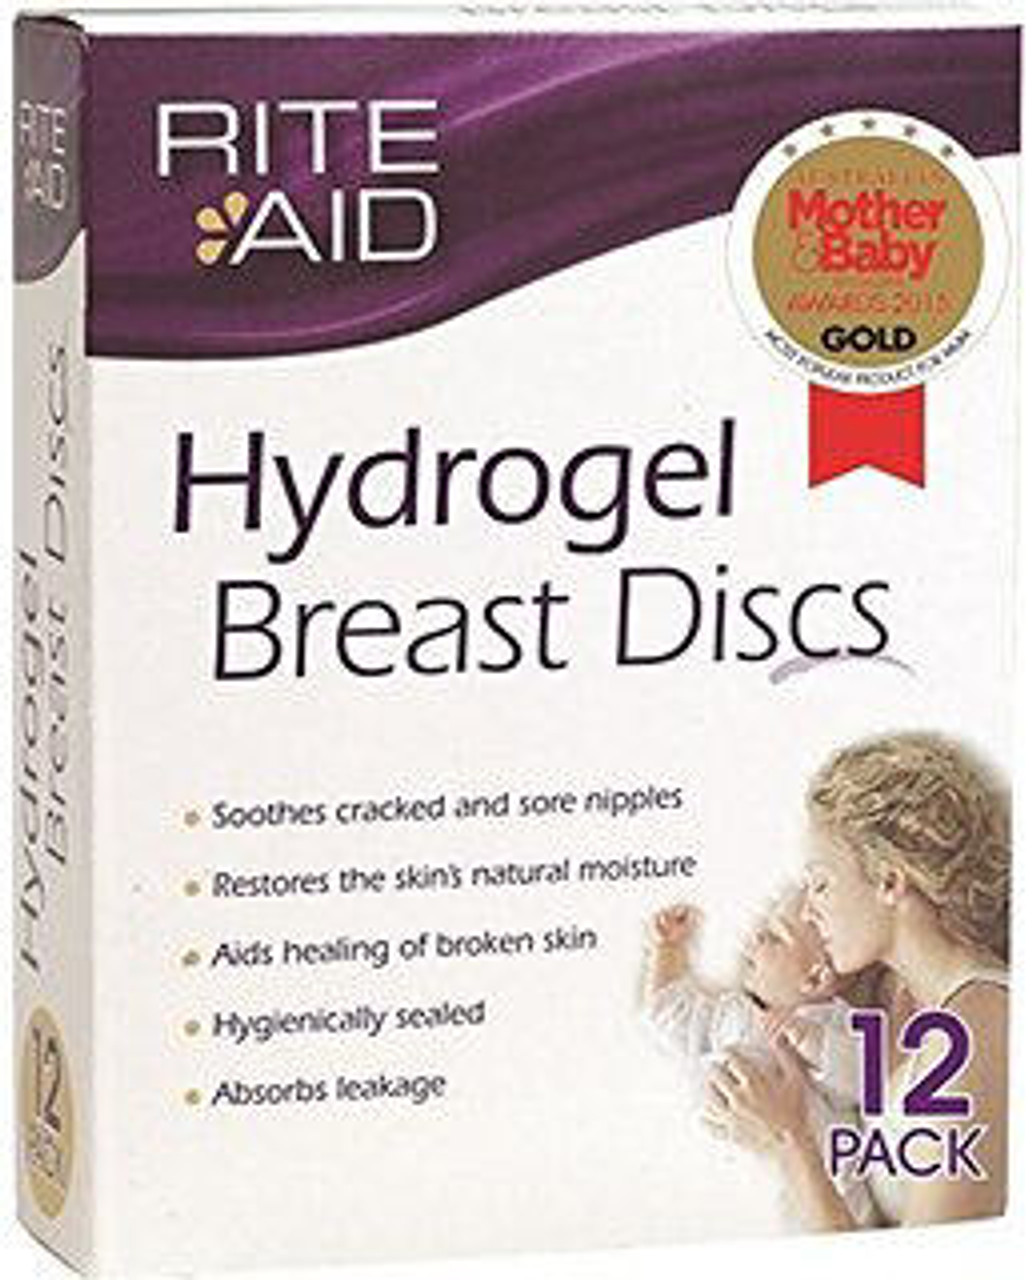 The Rite Aid Hydrogel Breast discs has been nominated as the